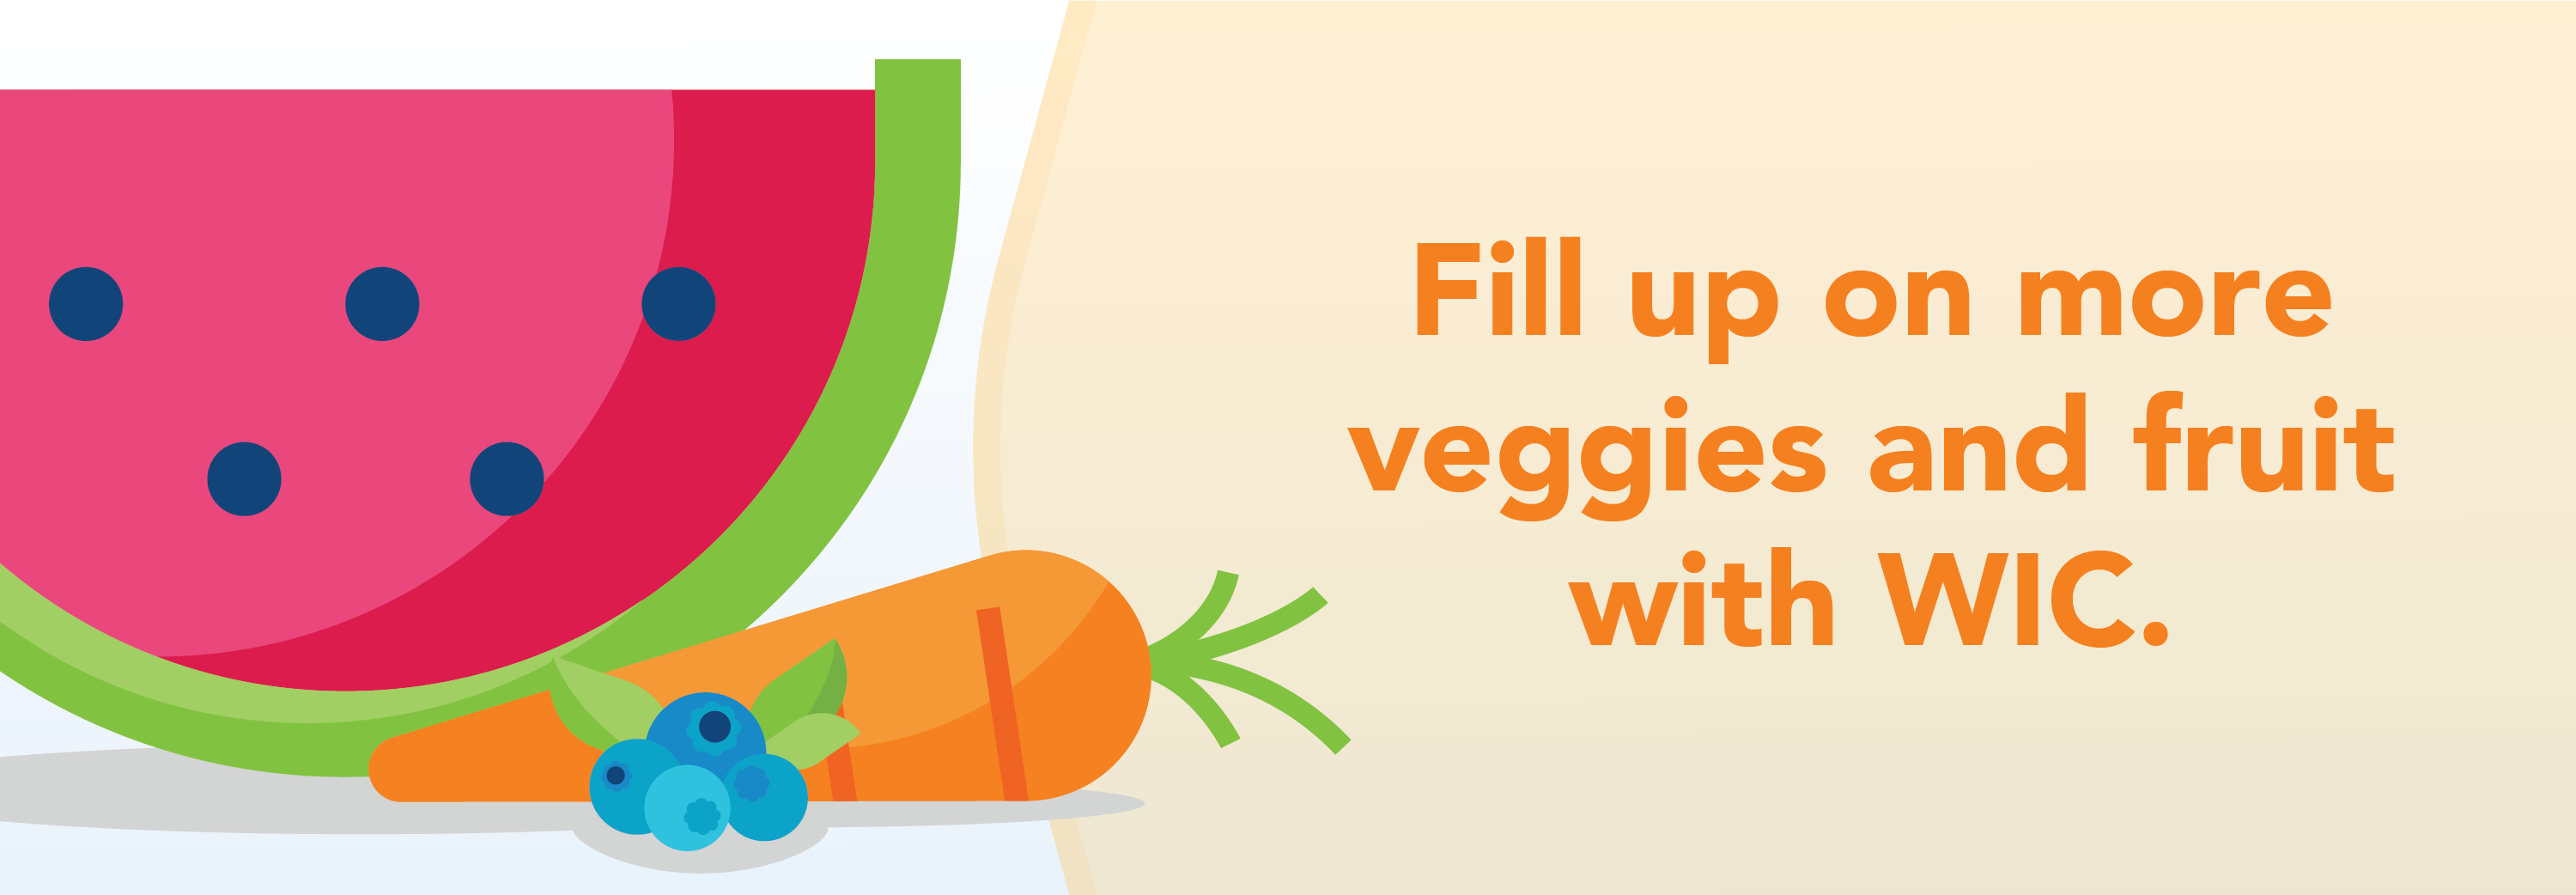 Fill up on Veggies with WIC banner